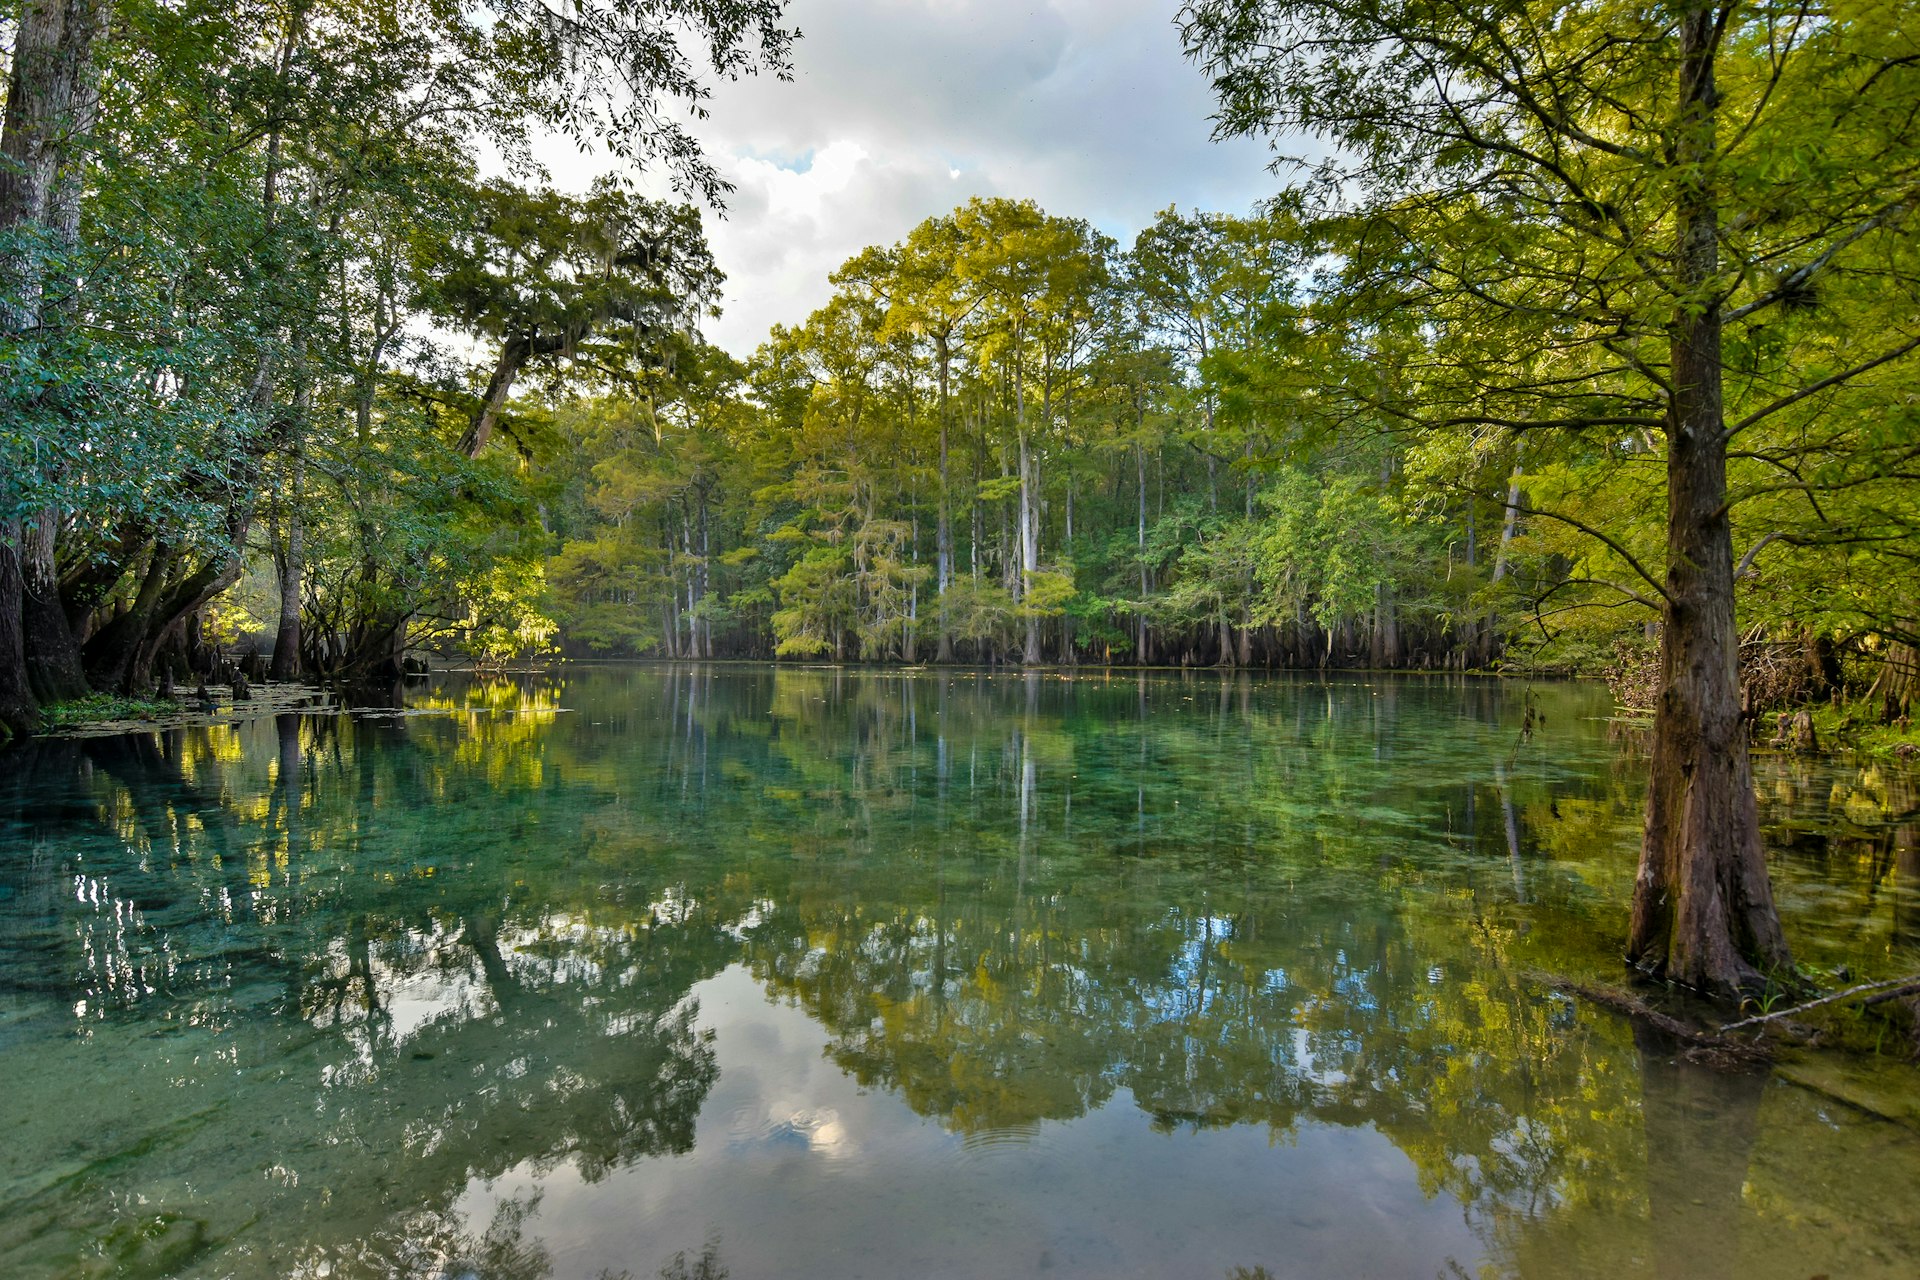 Features - Manatee Springs on the Suwanee River, Florida